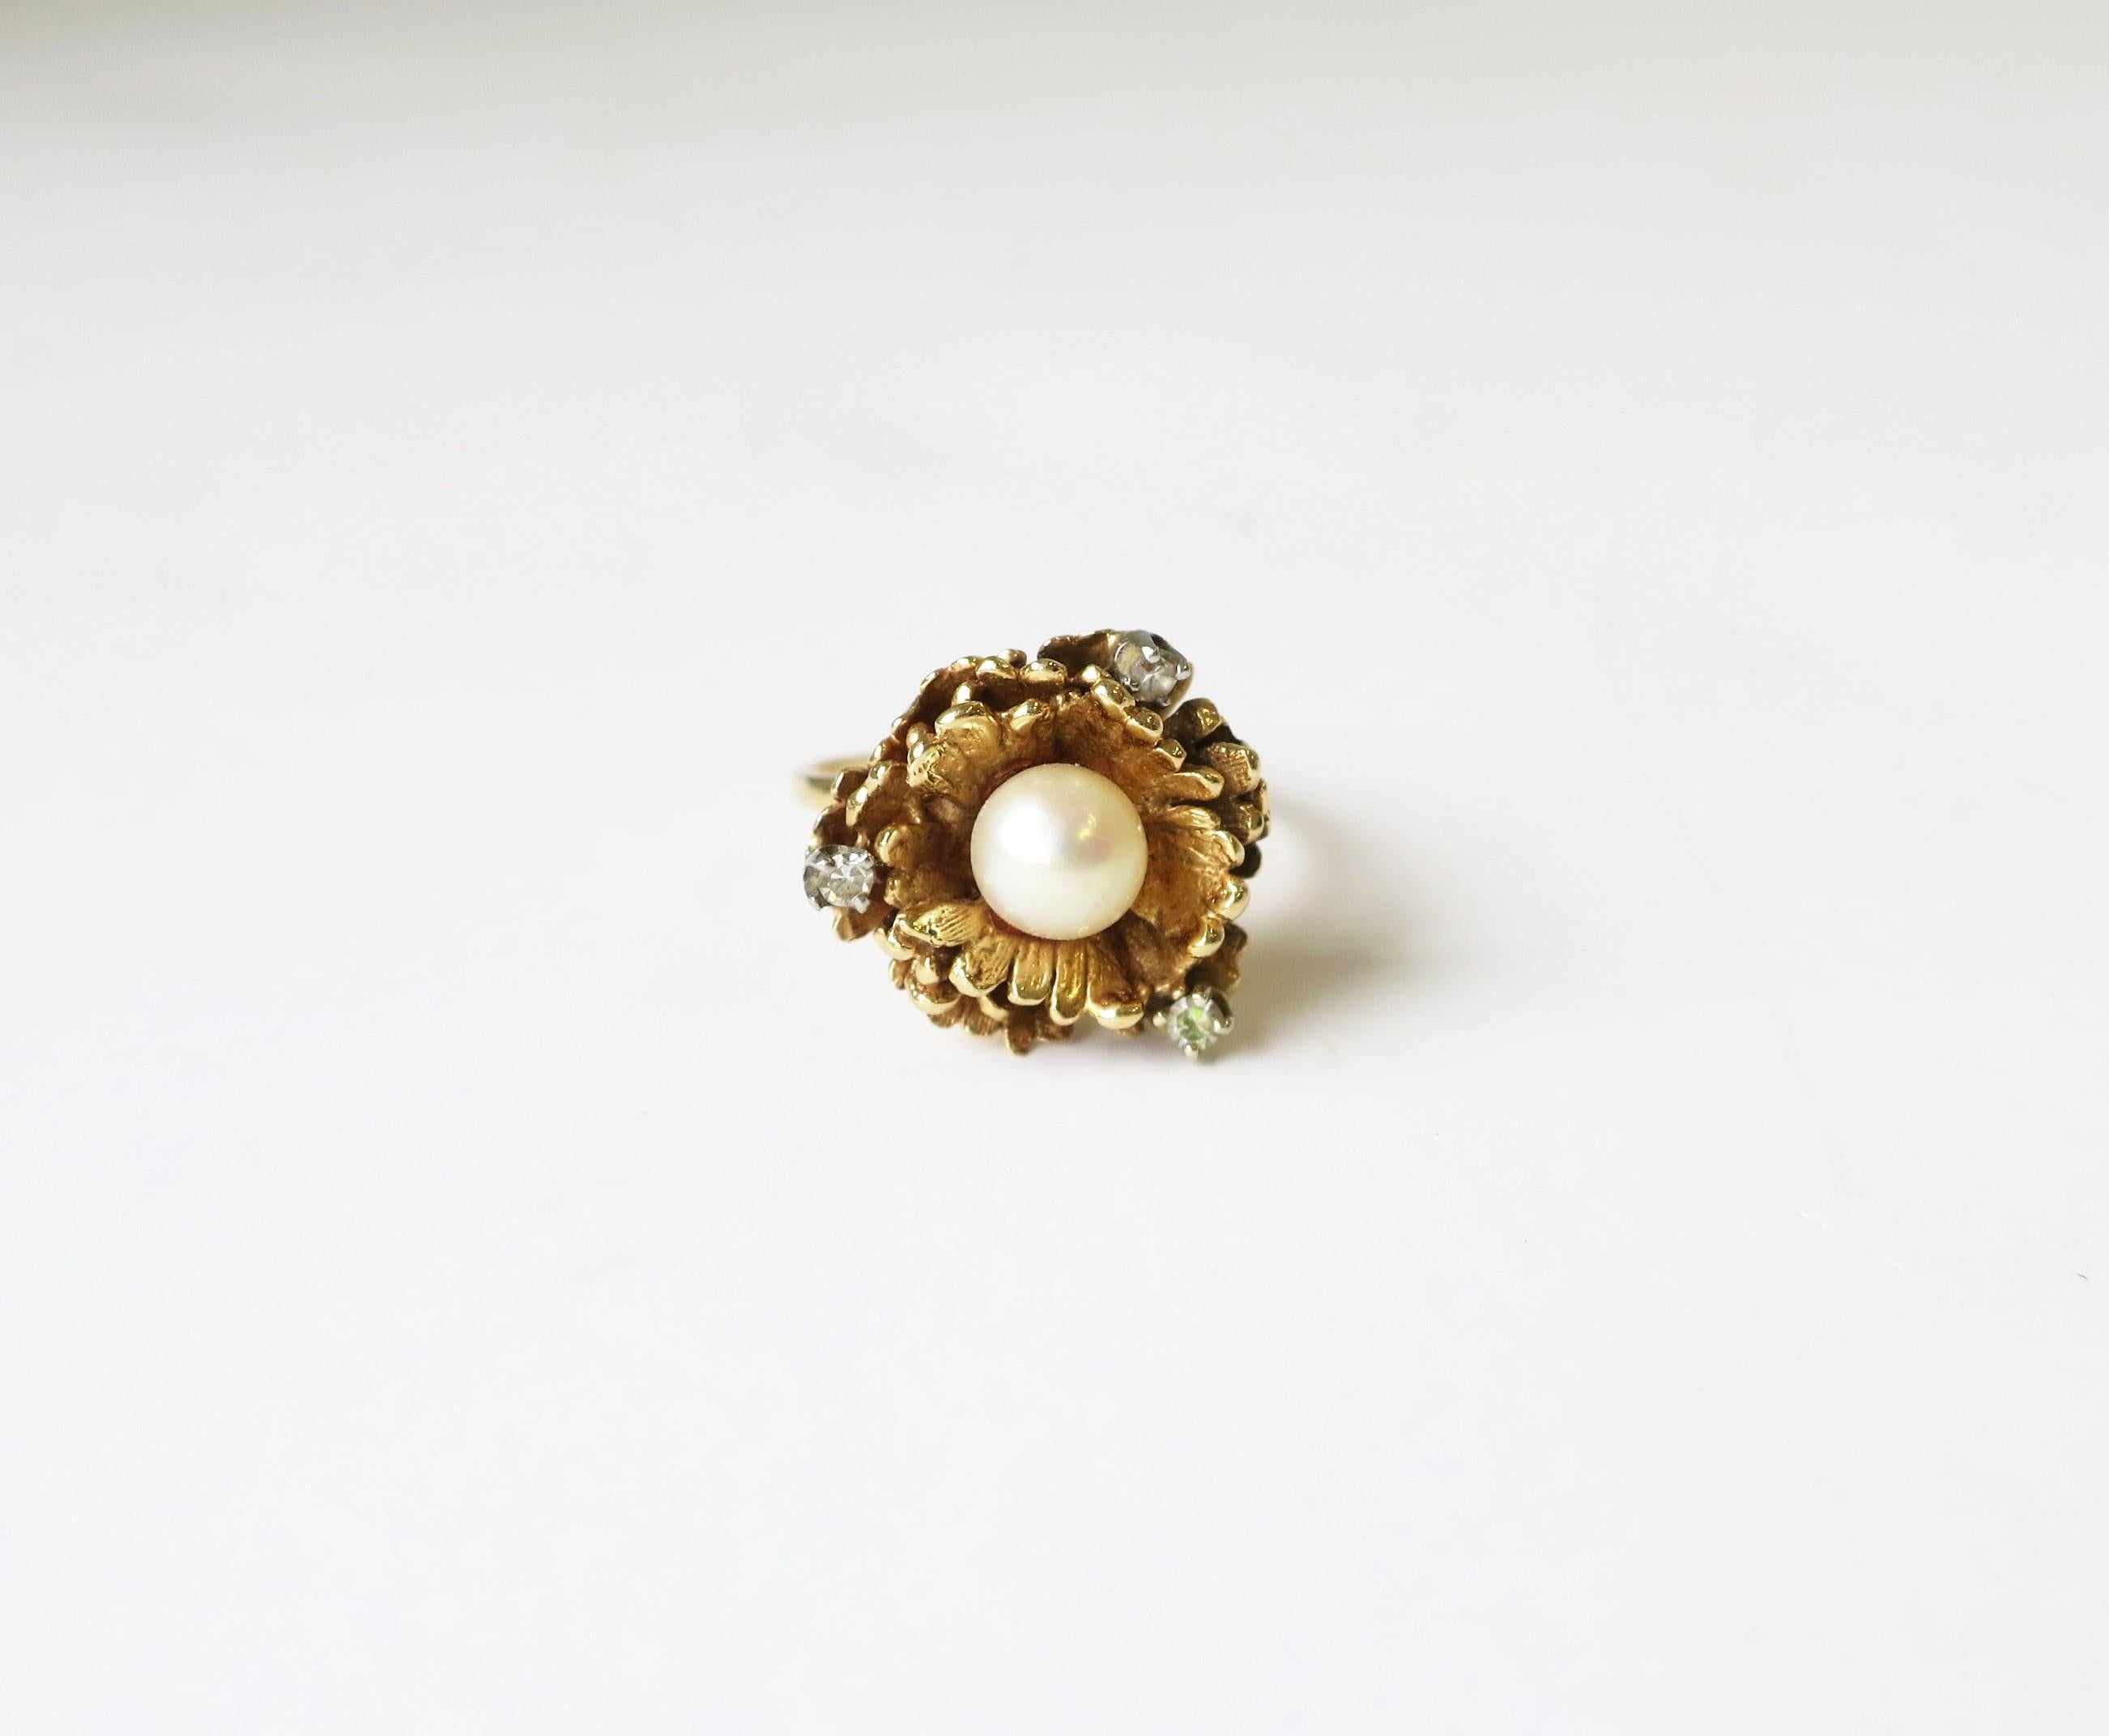 A vintage 14-karat yellow gold, cultured pearl, and diamond cocktail ring, circa mid-20th century, 1960s. Ring has a 14-karat yellow gold flower form, a center cultured pearl, and three (3) diamonds - all prong set in 14-kt white gold. Ring is a